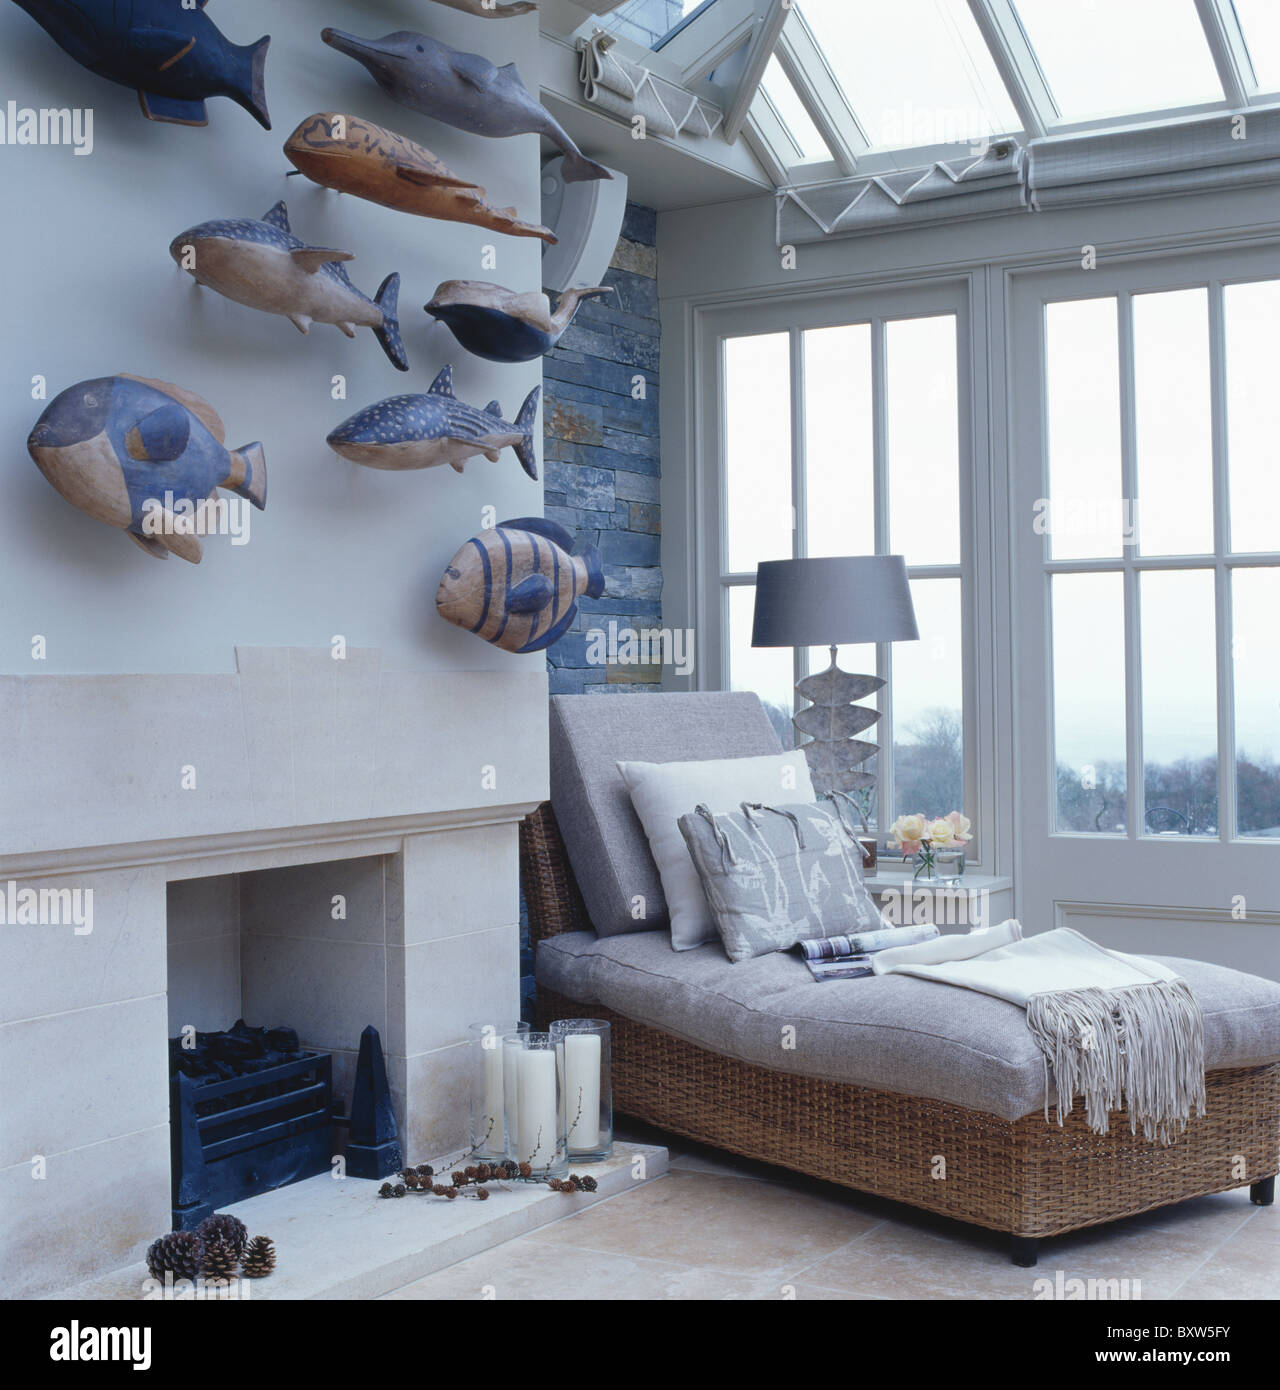 Collection of painted wooden fish above fireplace in loft conversion bedroom with gray day-bed in front of large window Stock Photo